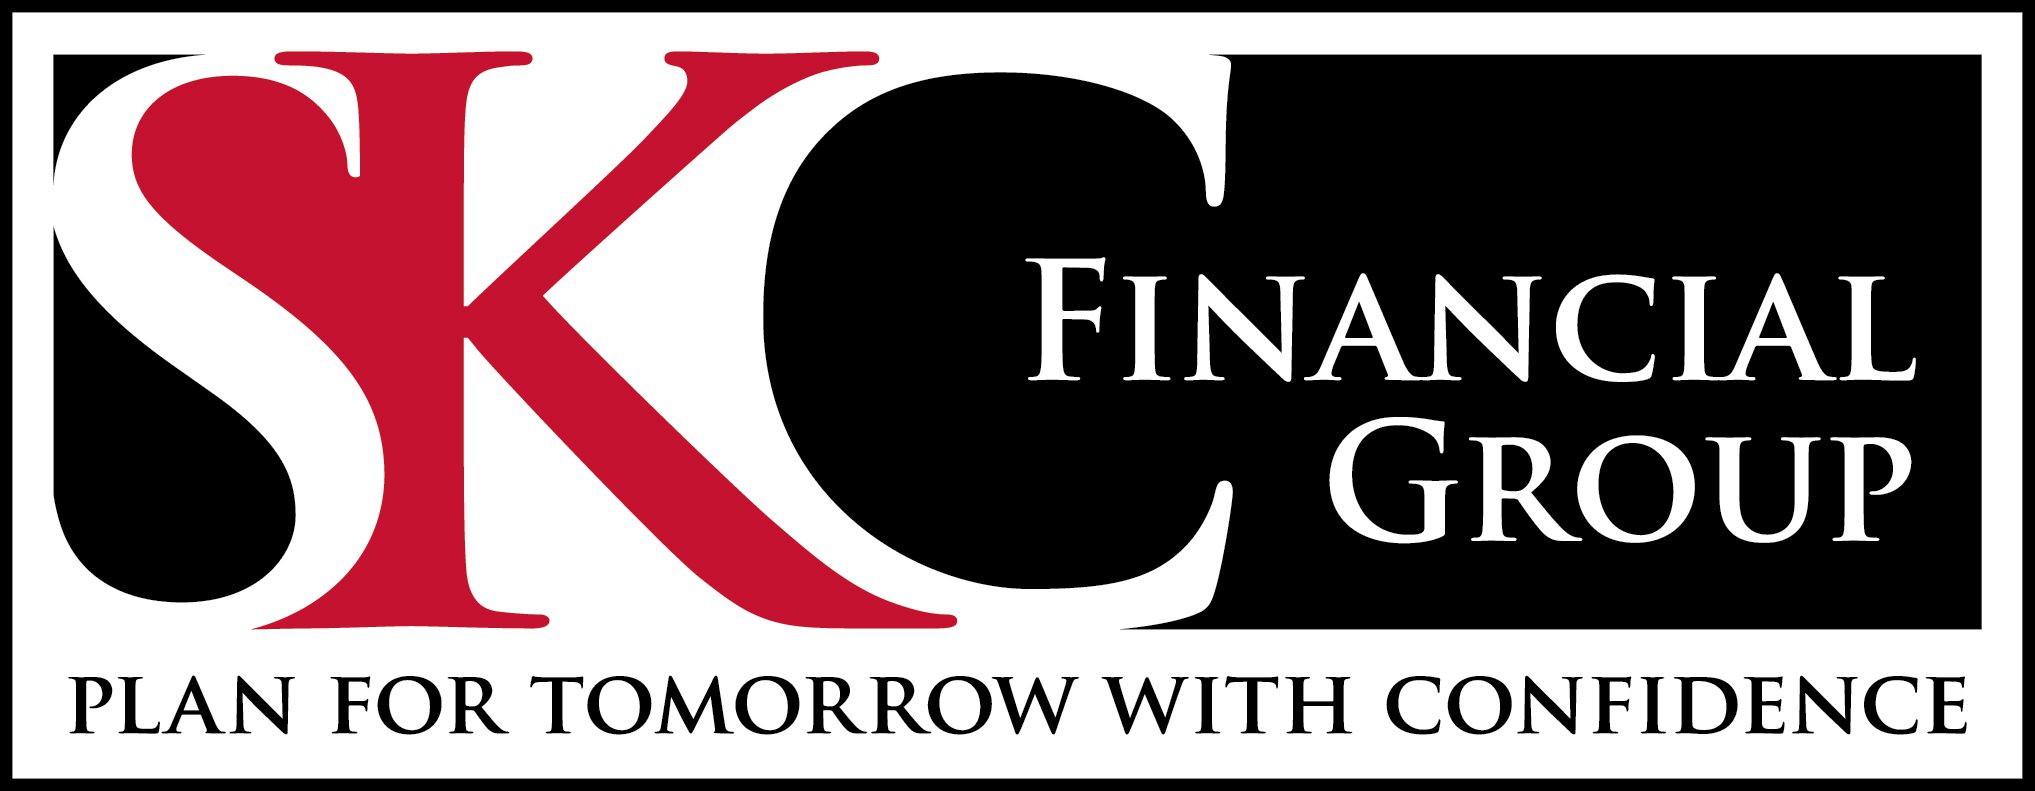 SKC Financial Group